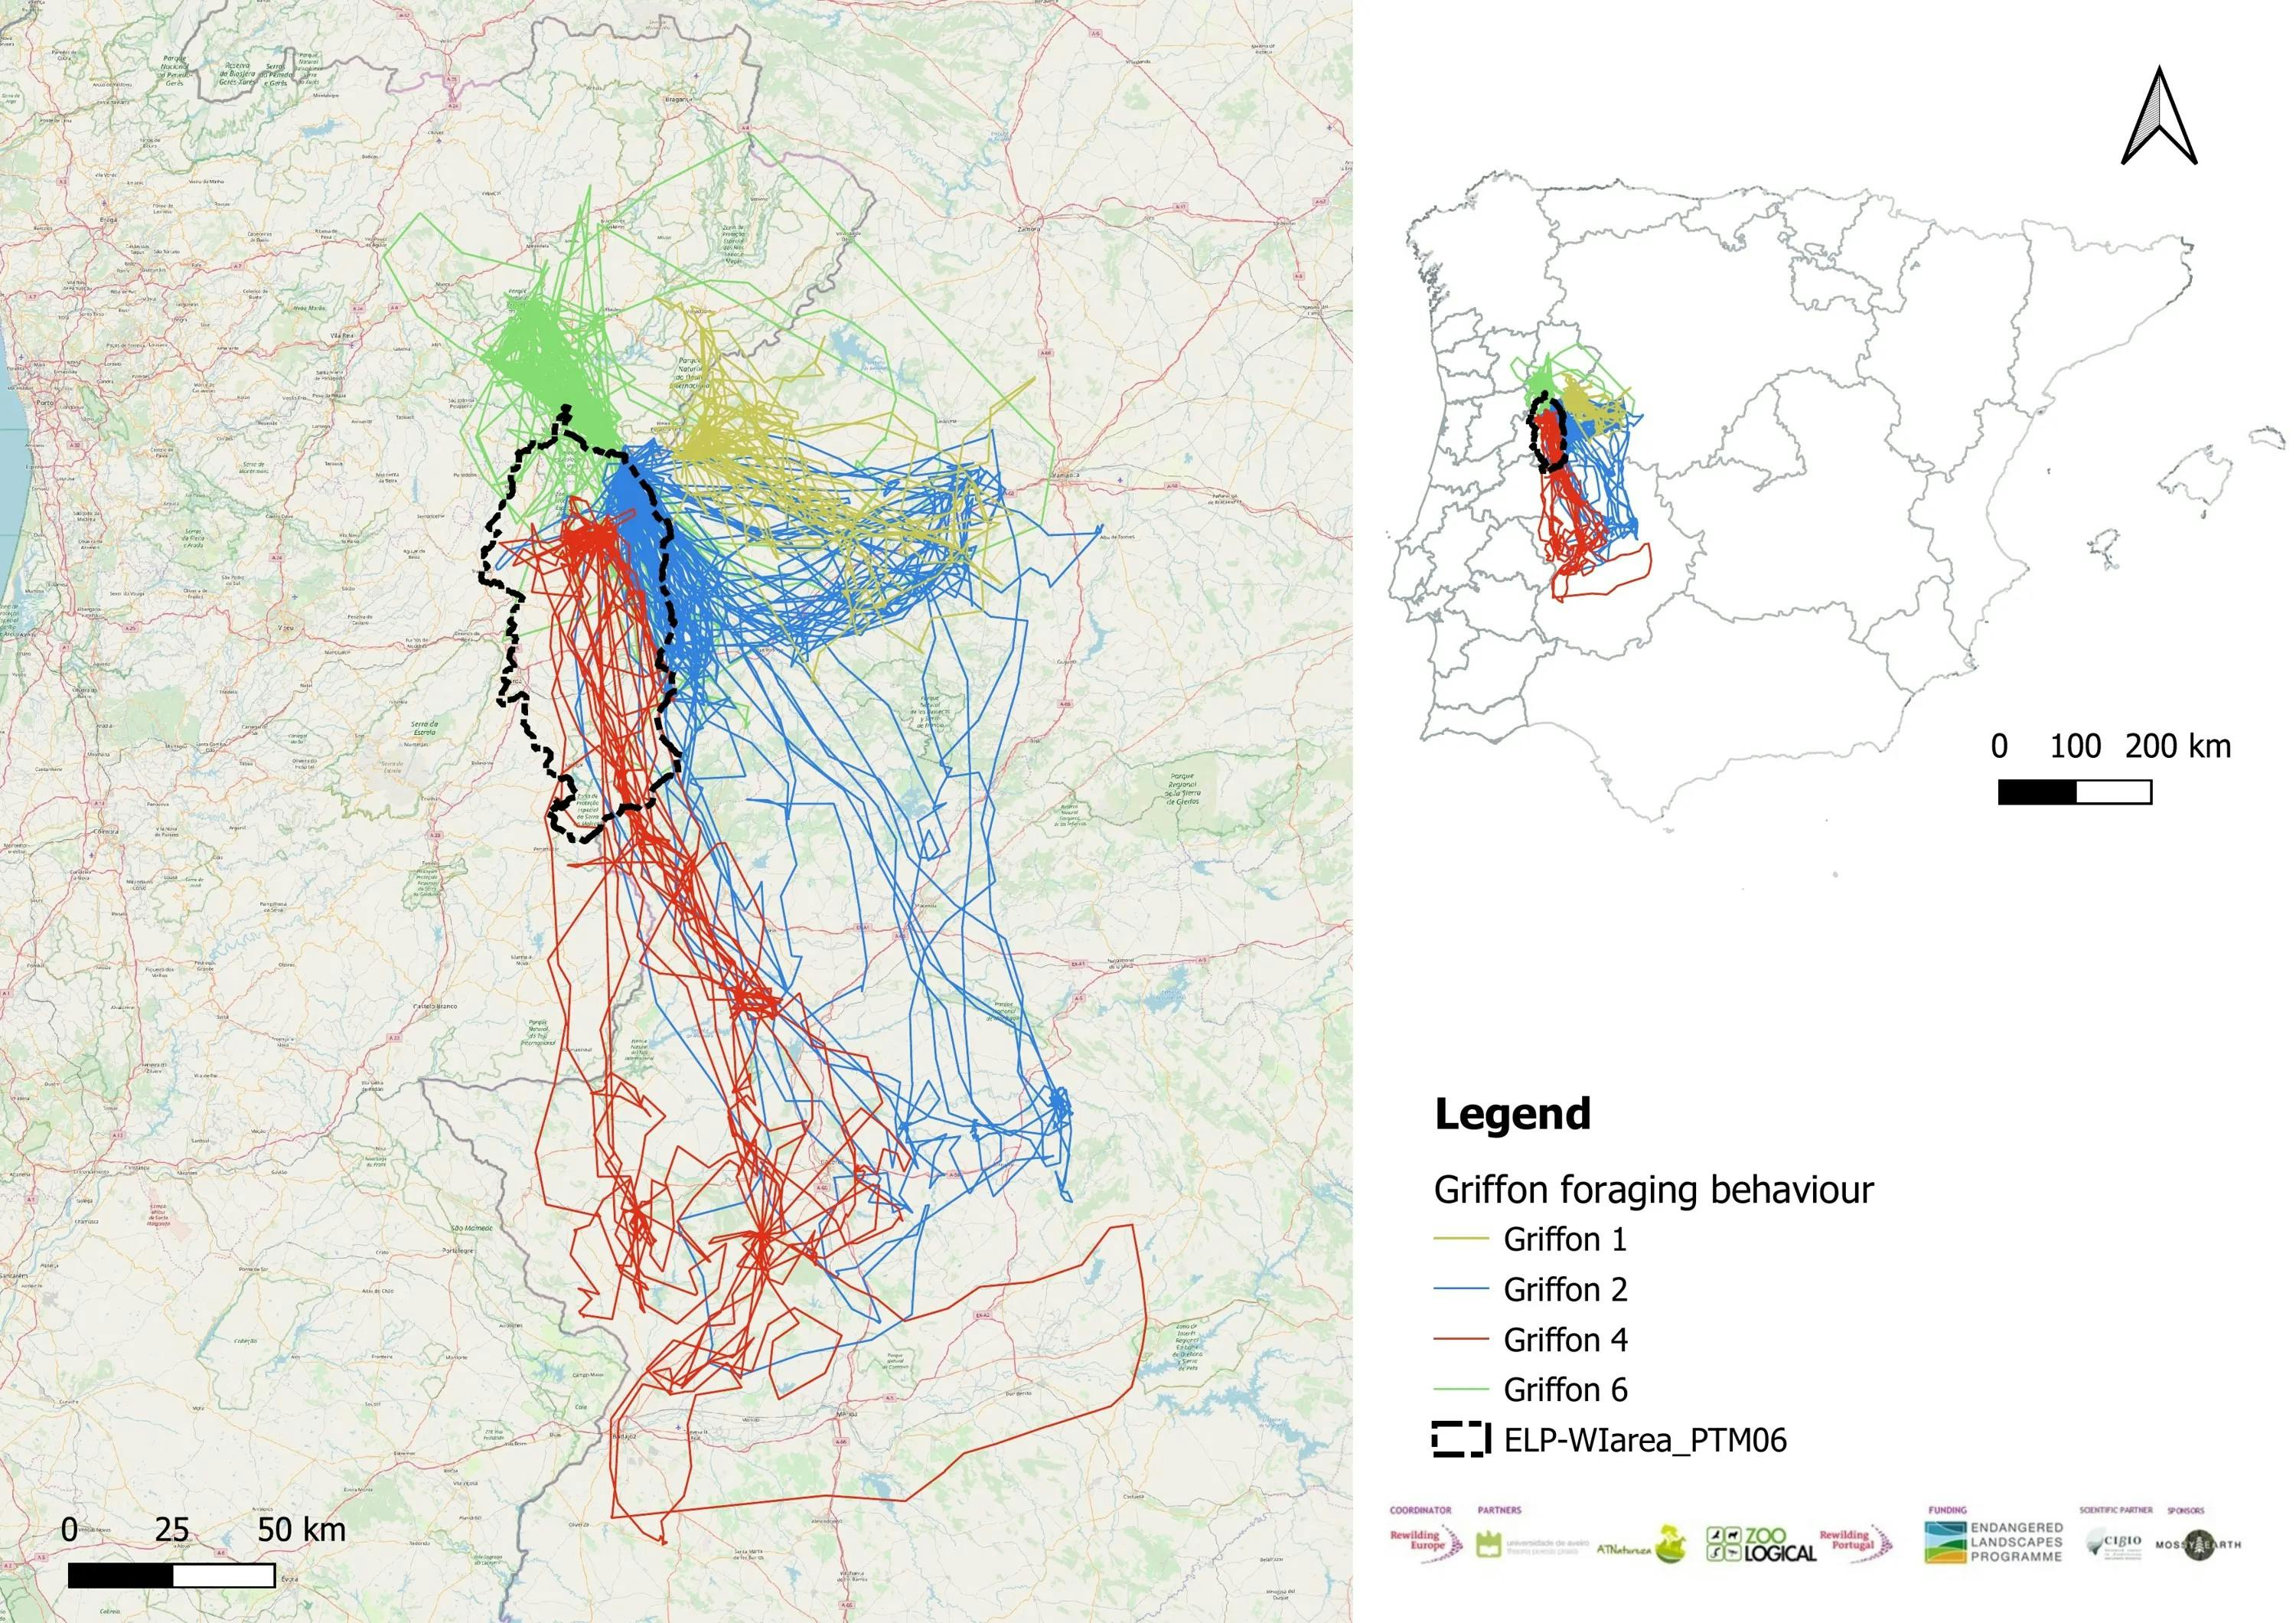 Map of the Iberian Peninsula showing the movement pattern of the Griffon vultures tagged through one of our rewilding projects, as a set of colored lines. 